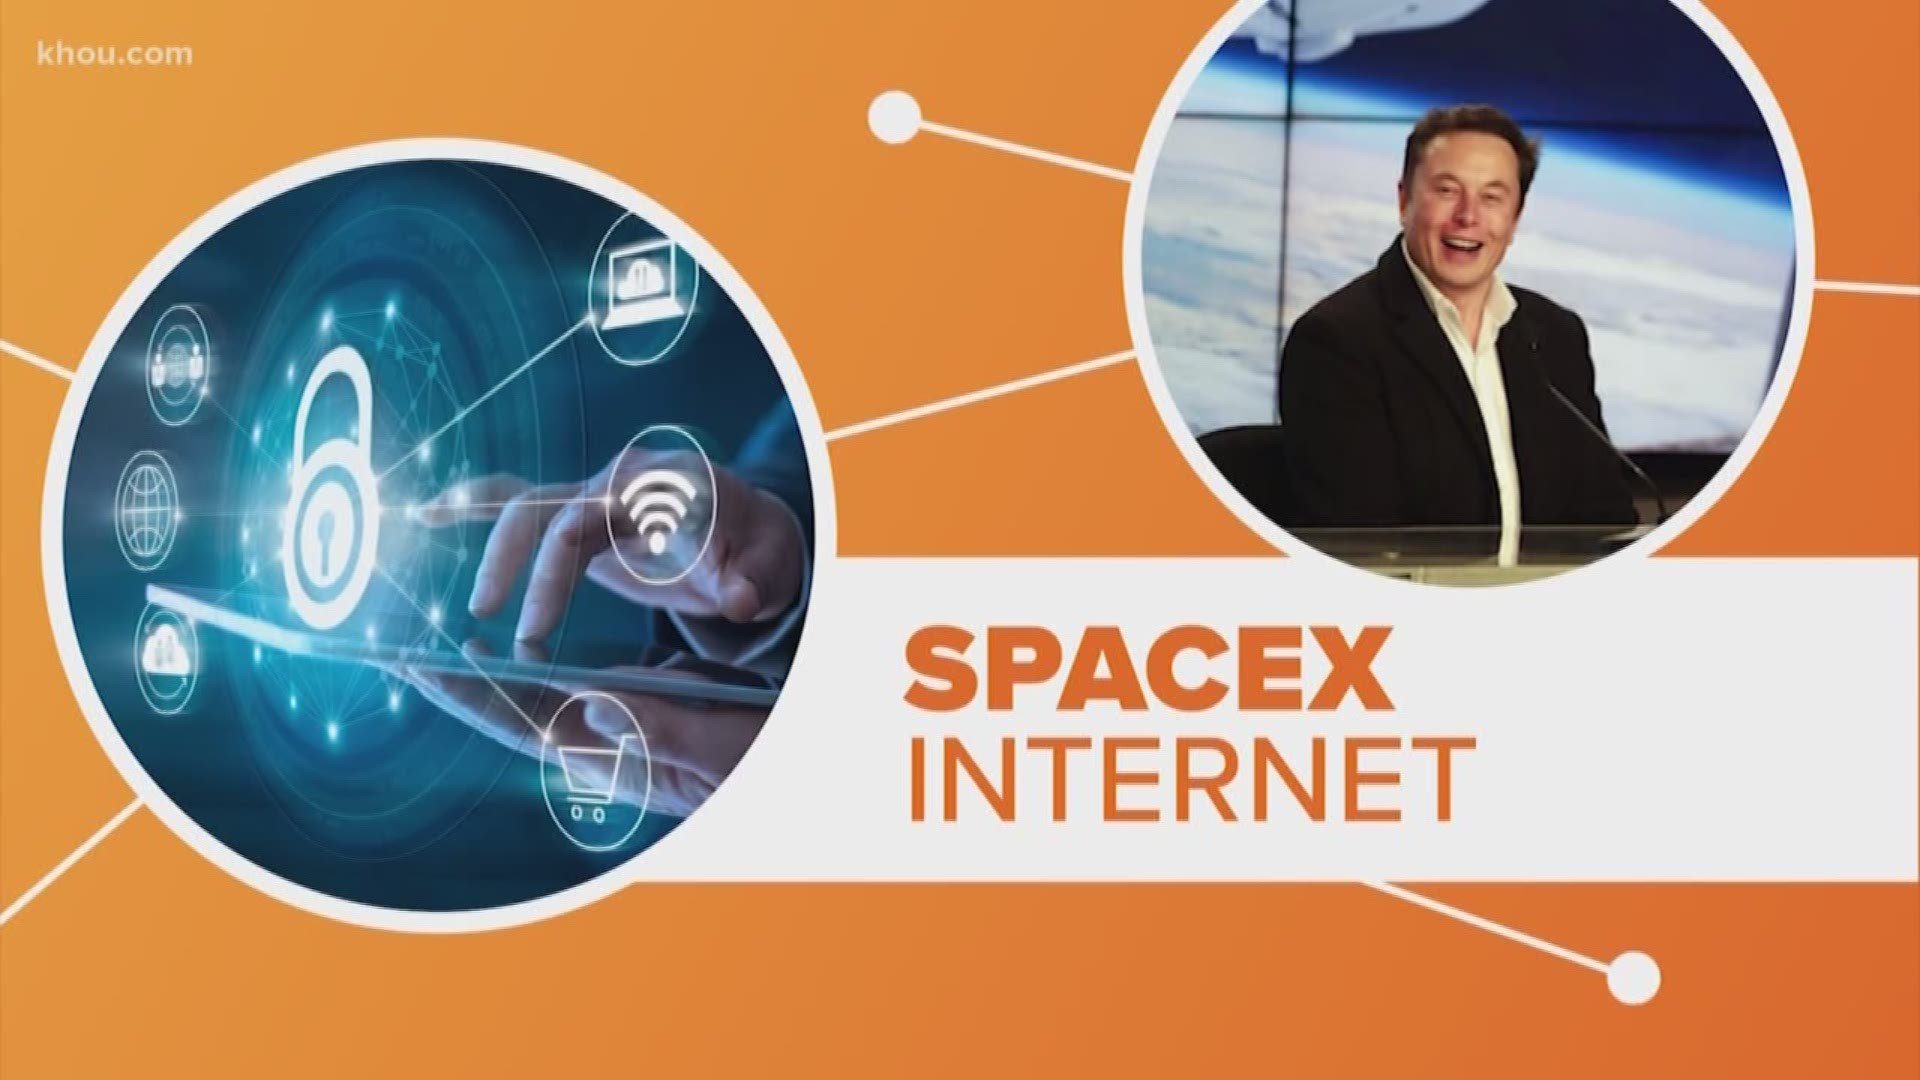 SpaceX is ready to launch into a new industry — the internet! So, when could you see the company in your home? Janelle Bludau connects the dots.